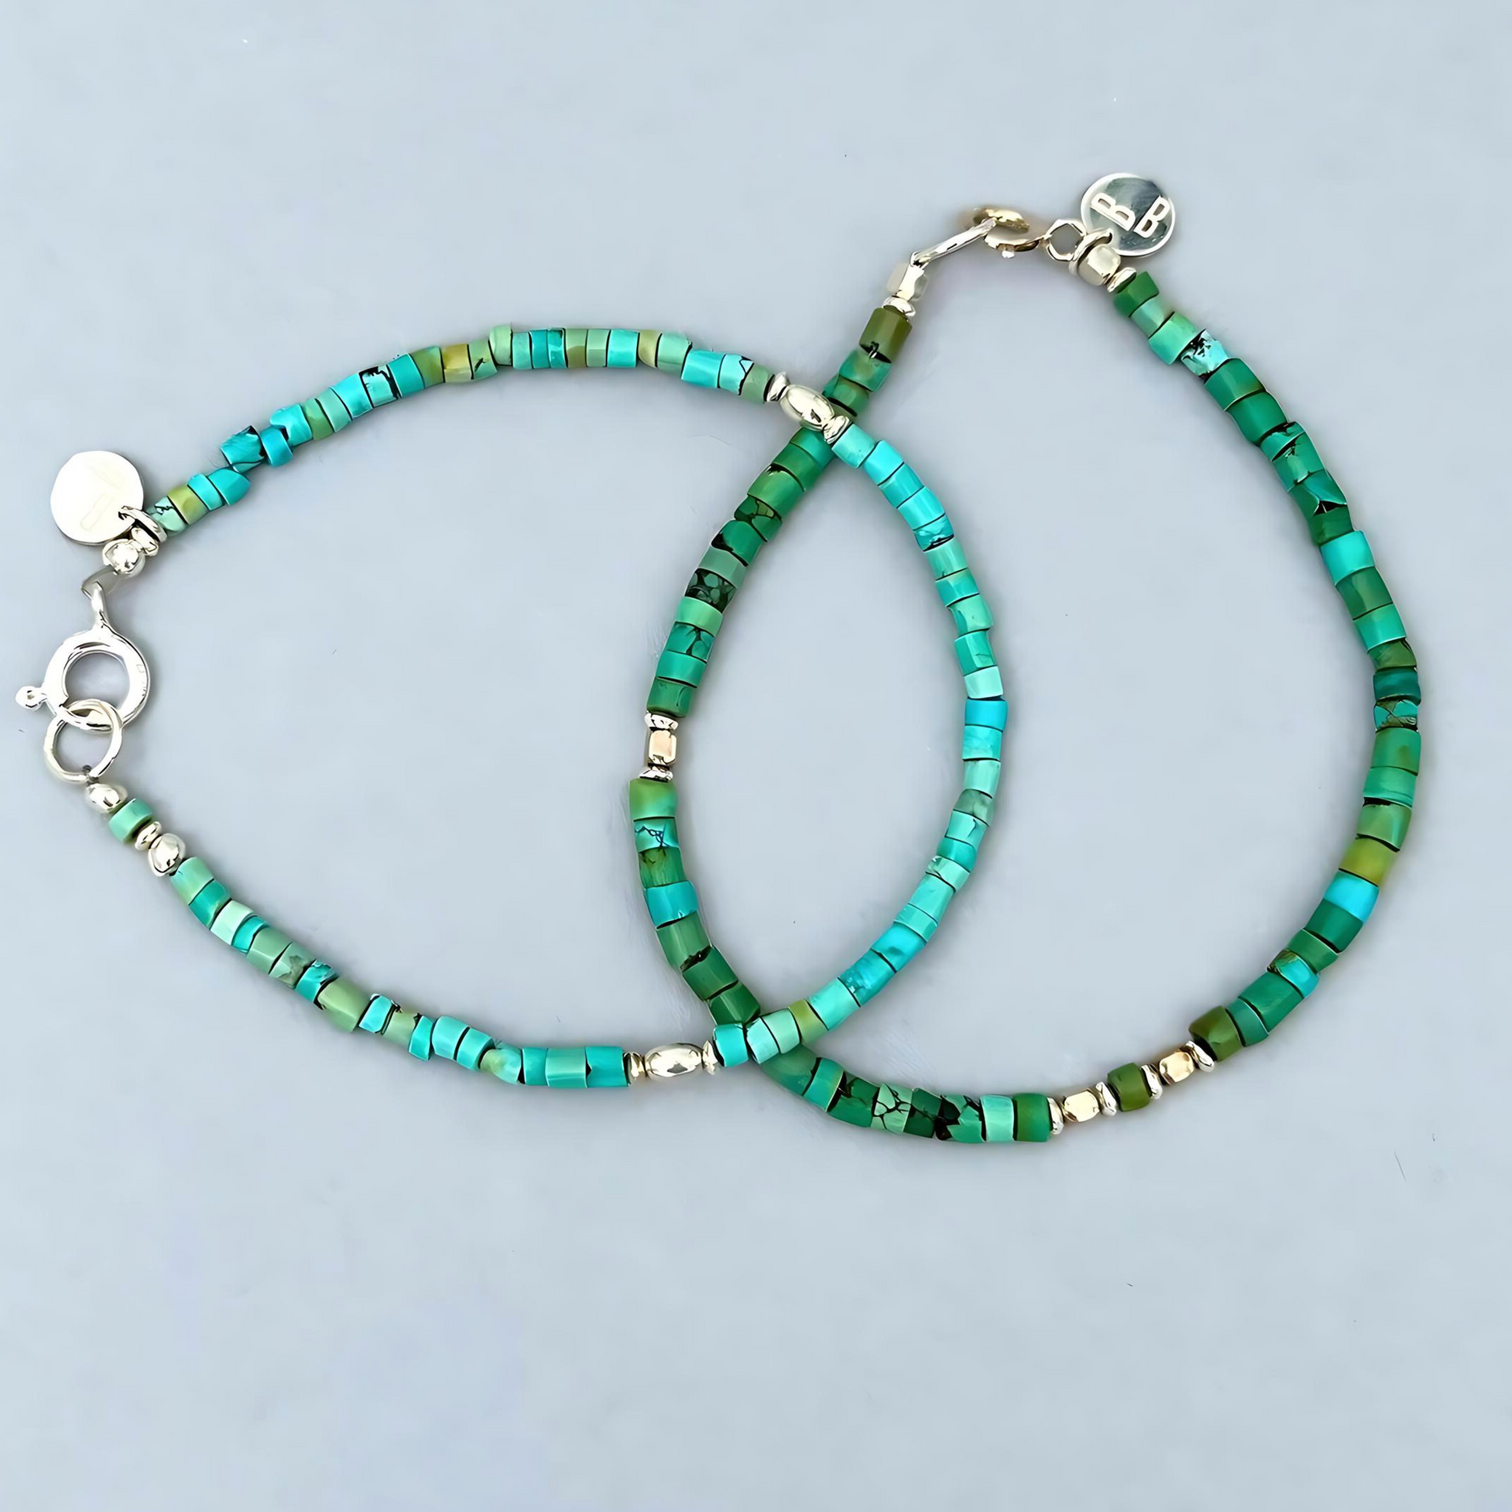 The Ocean Green and the Surfer's Paradise Men's Bracelets are an homage to the ocean and surfers. They are made s made with  turquoise rondelles and a touch of Sterling Silver. 